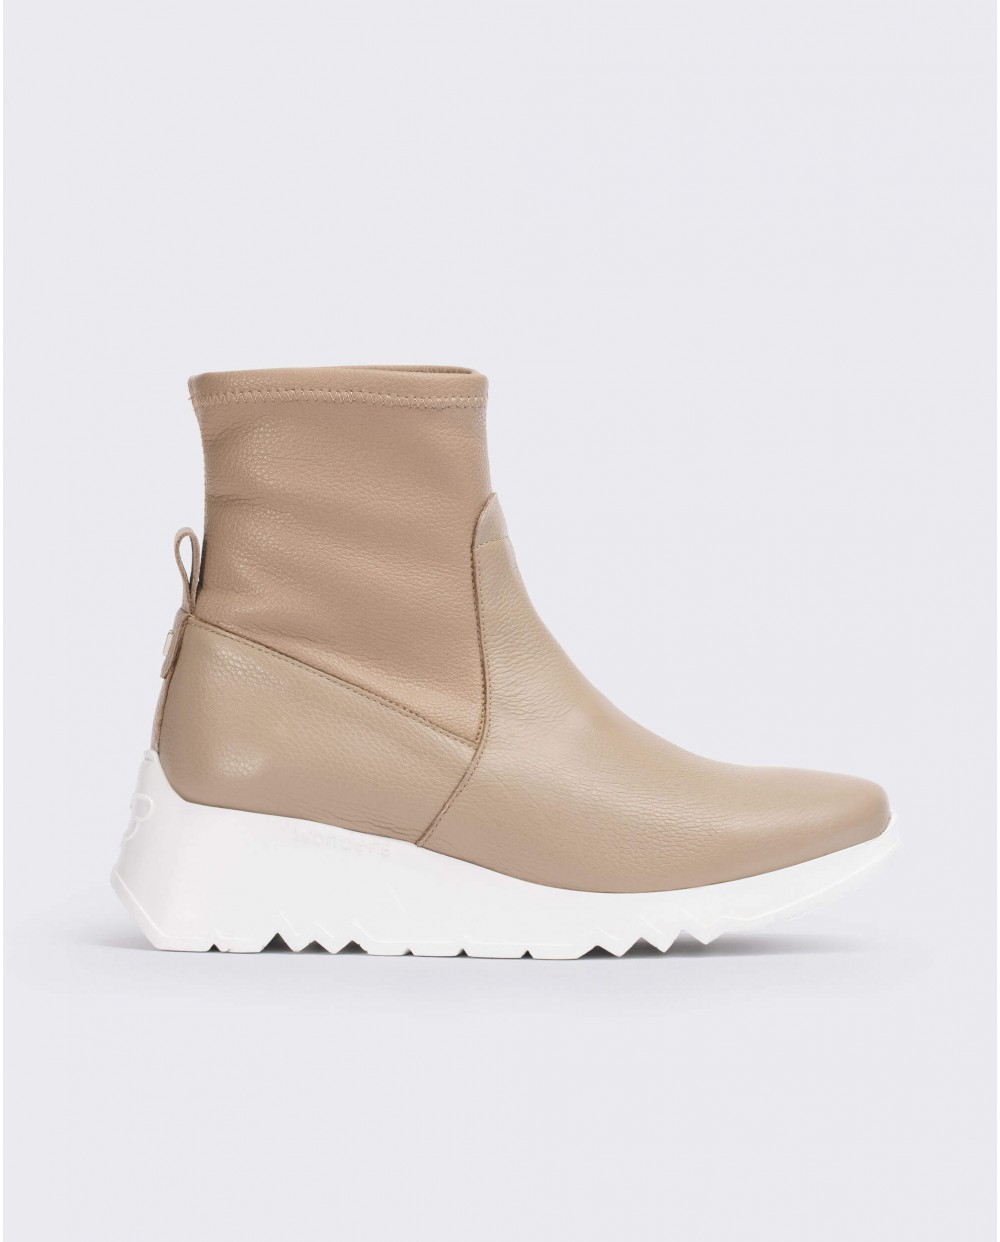 Wonders-Ankle Boots-Brown Tazu Ankle Boot